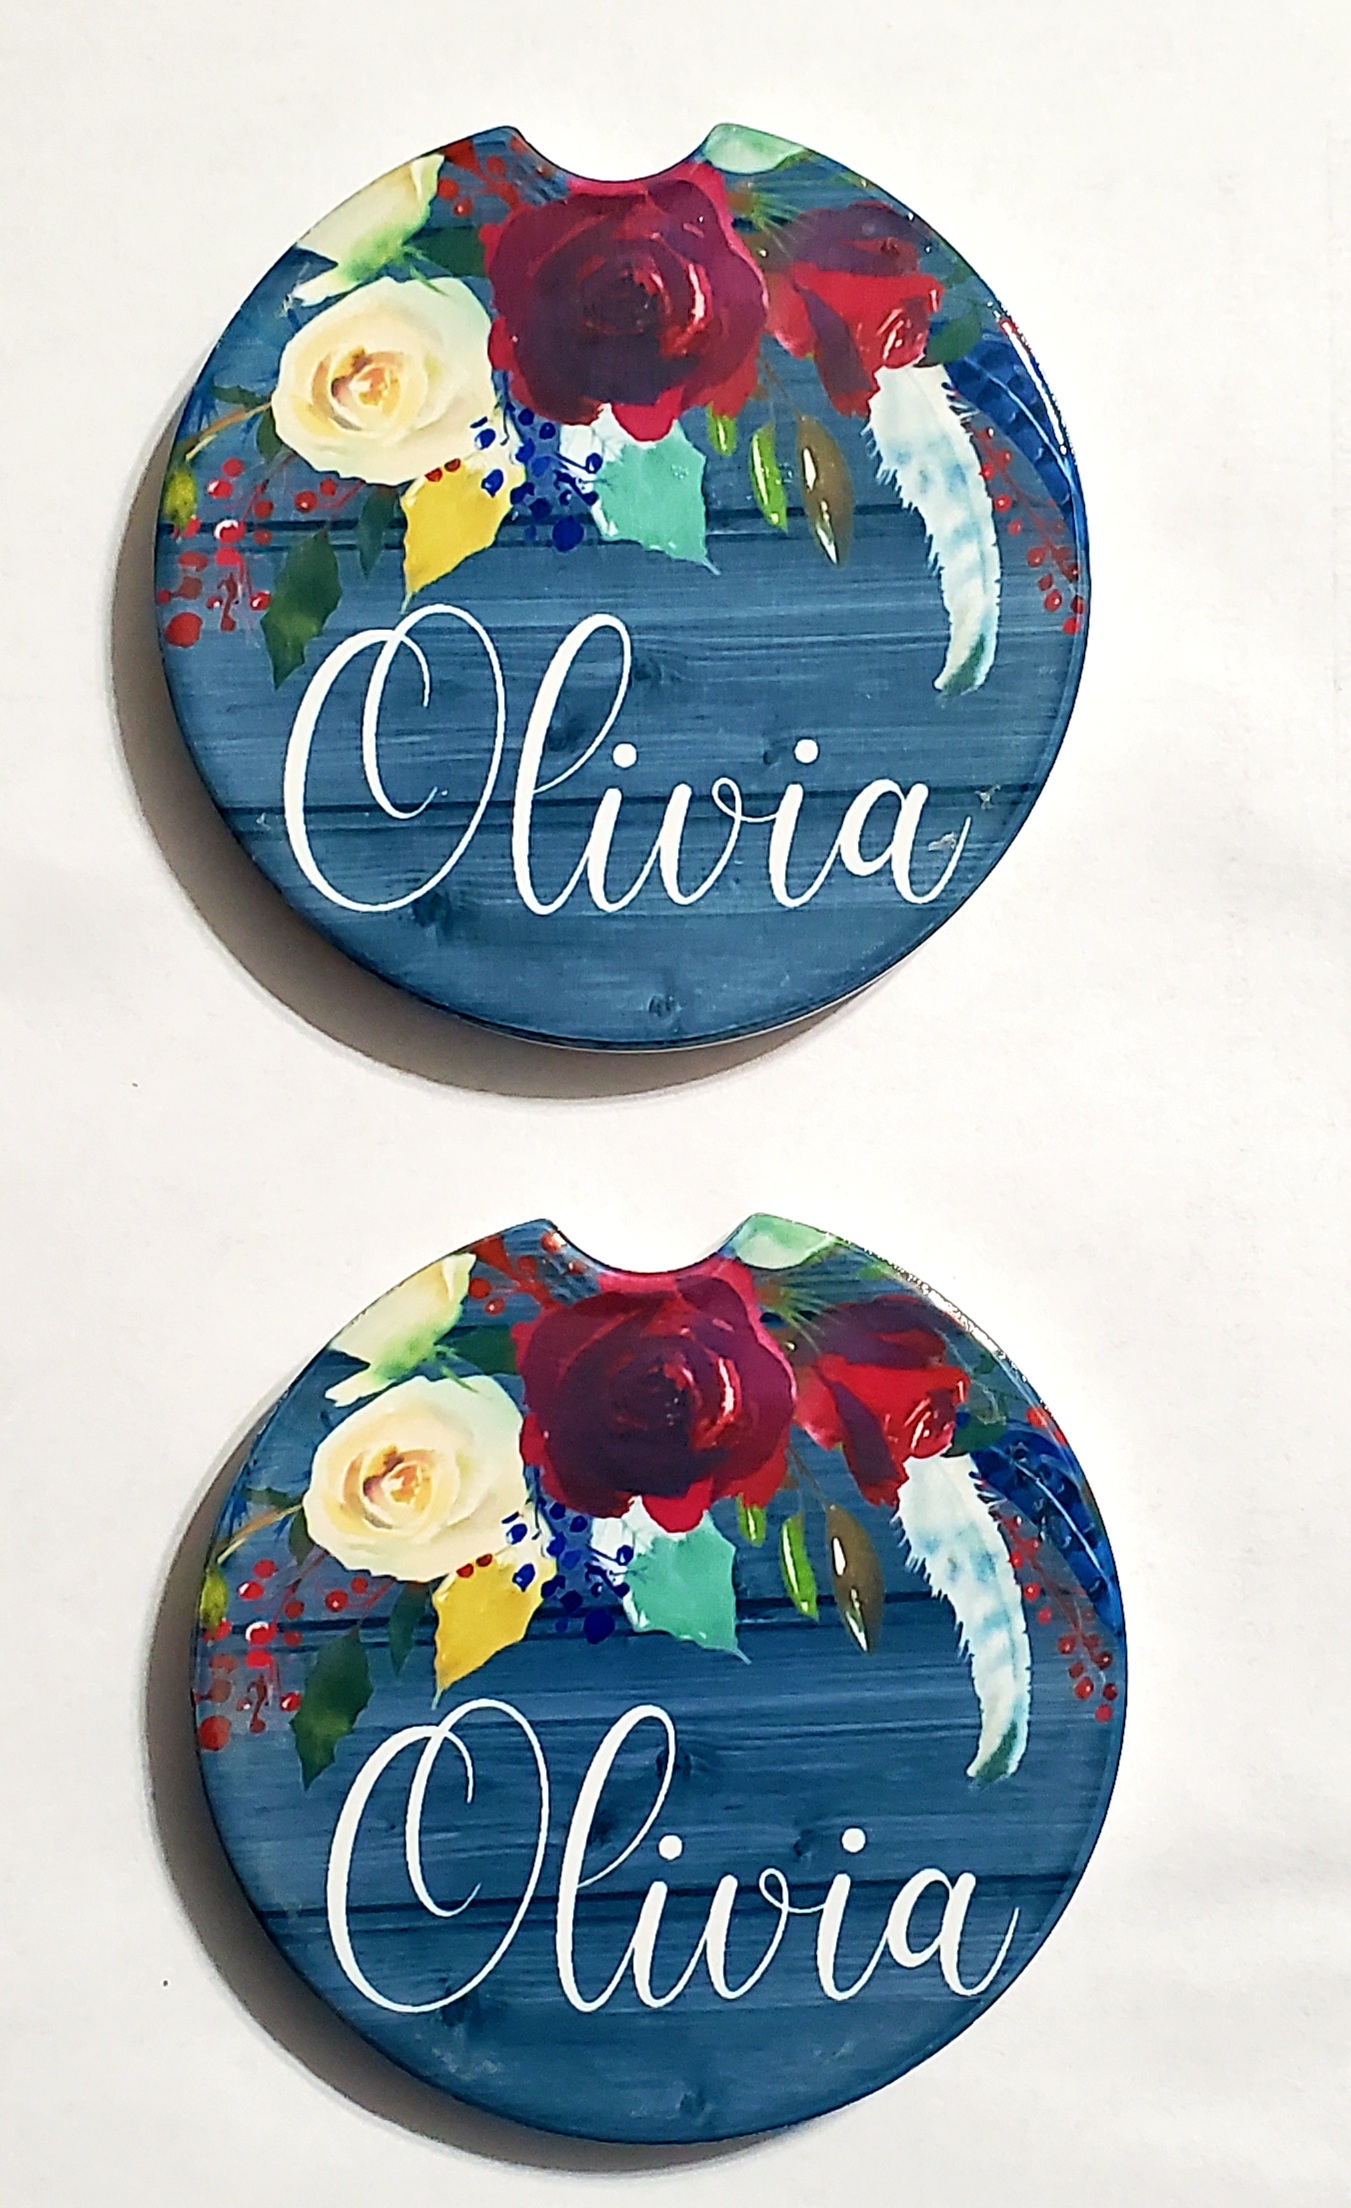 Floral Coasters made with sublimation printing